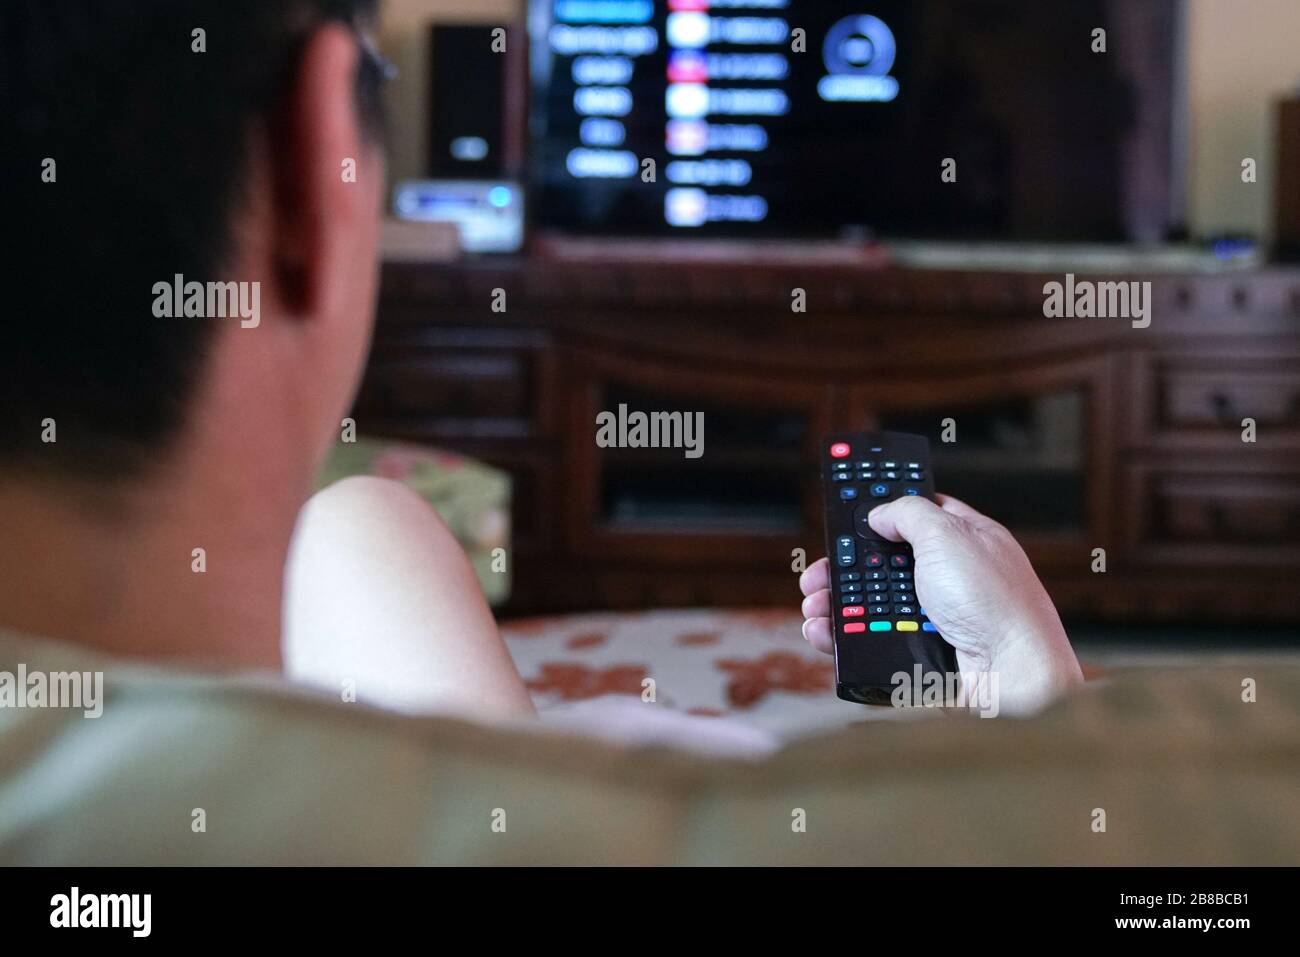 Man watching tv with focus on his hands on the remote control. Home entertainment or stay at home concept. Stock Photo